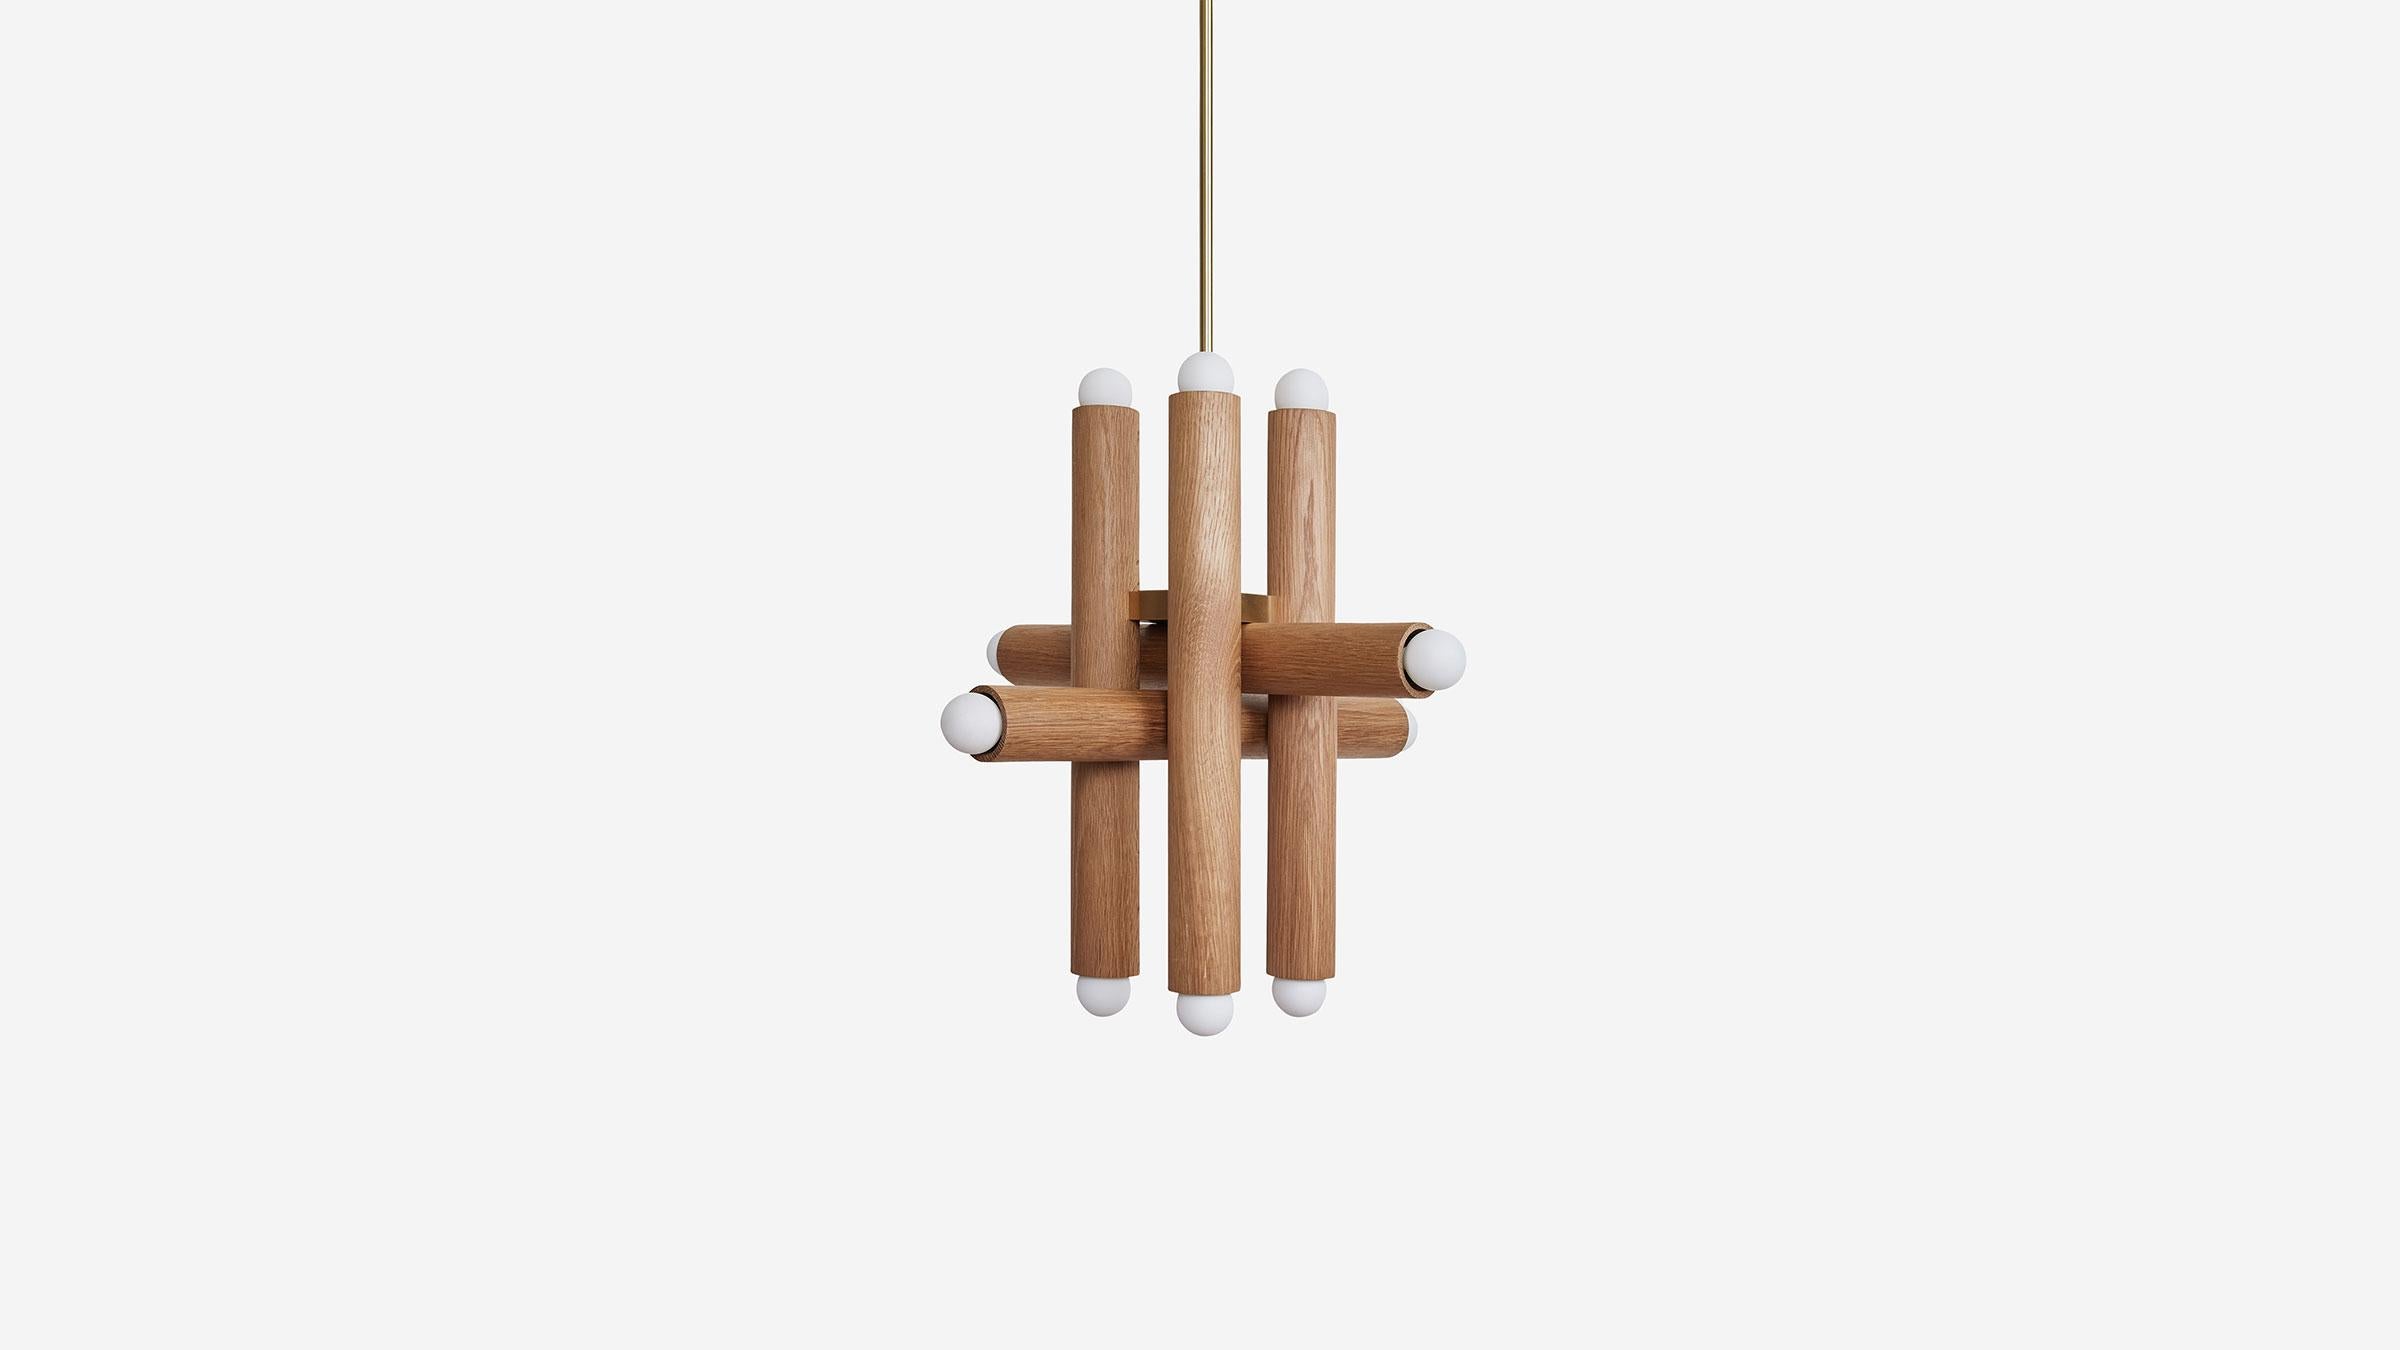 HIEROGLYPH PENDANT XII expands into a thicket of wooden canisters casting light in all directions. The physicality of both the density and luminosity of the fixture is countered by a delicate metal rod, allowing the fixture to effortlessly branch